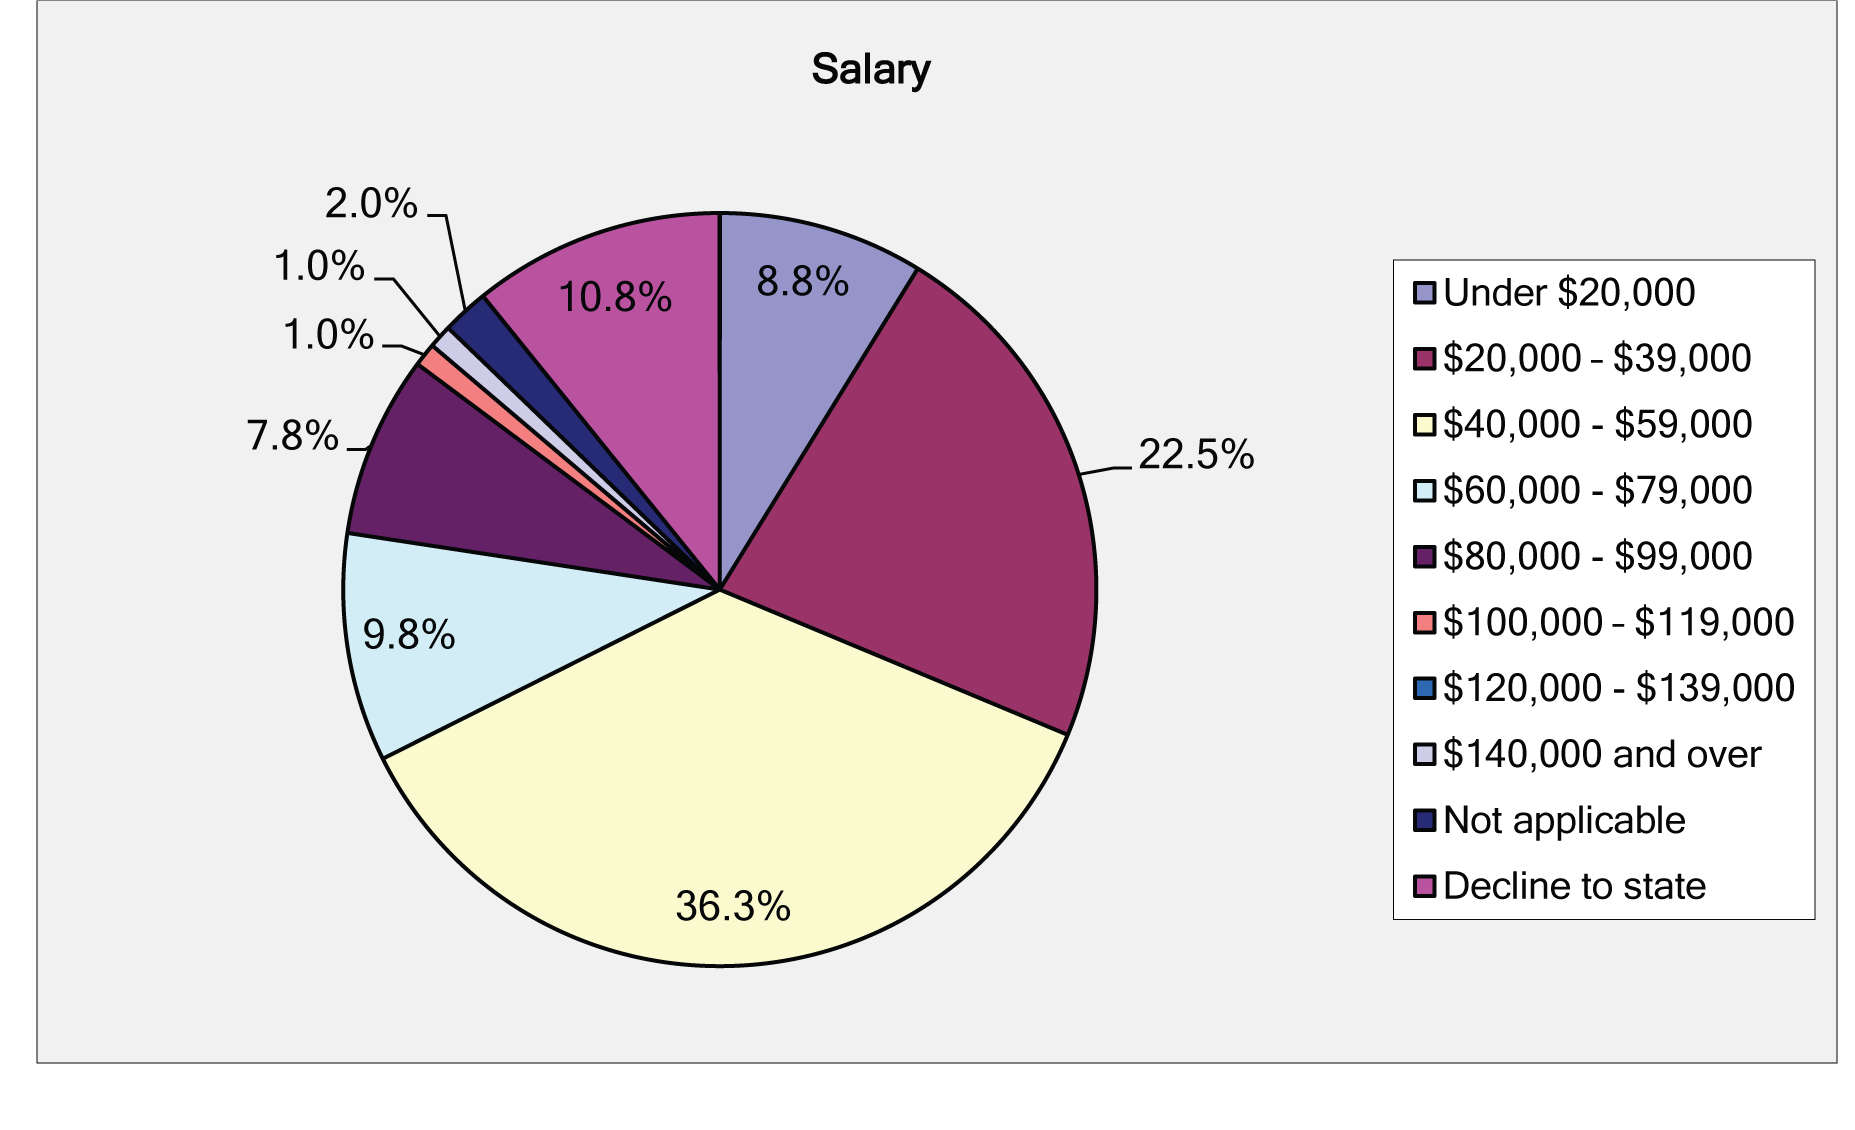 Figure 6. Percentage of CoMT respondents by salary bracket.